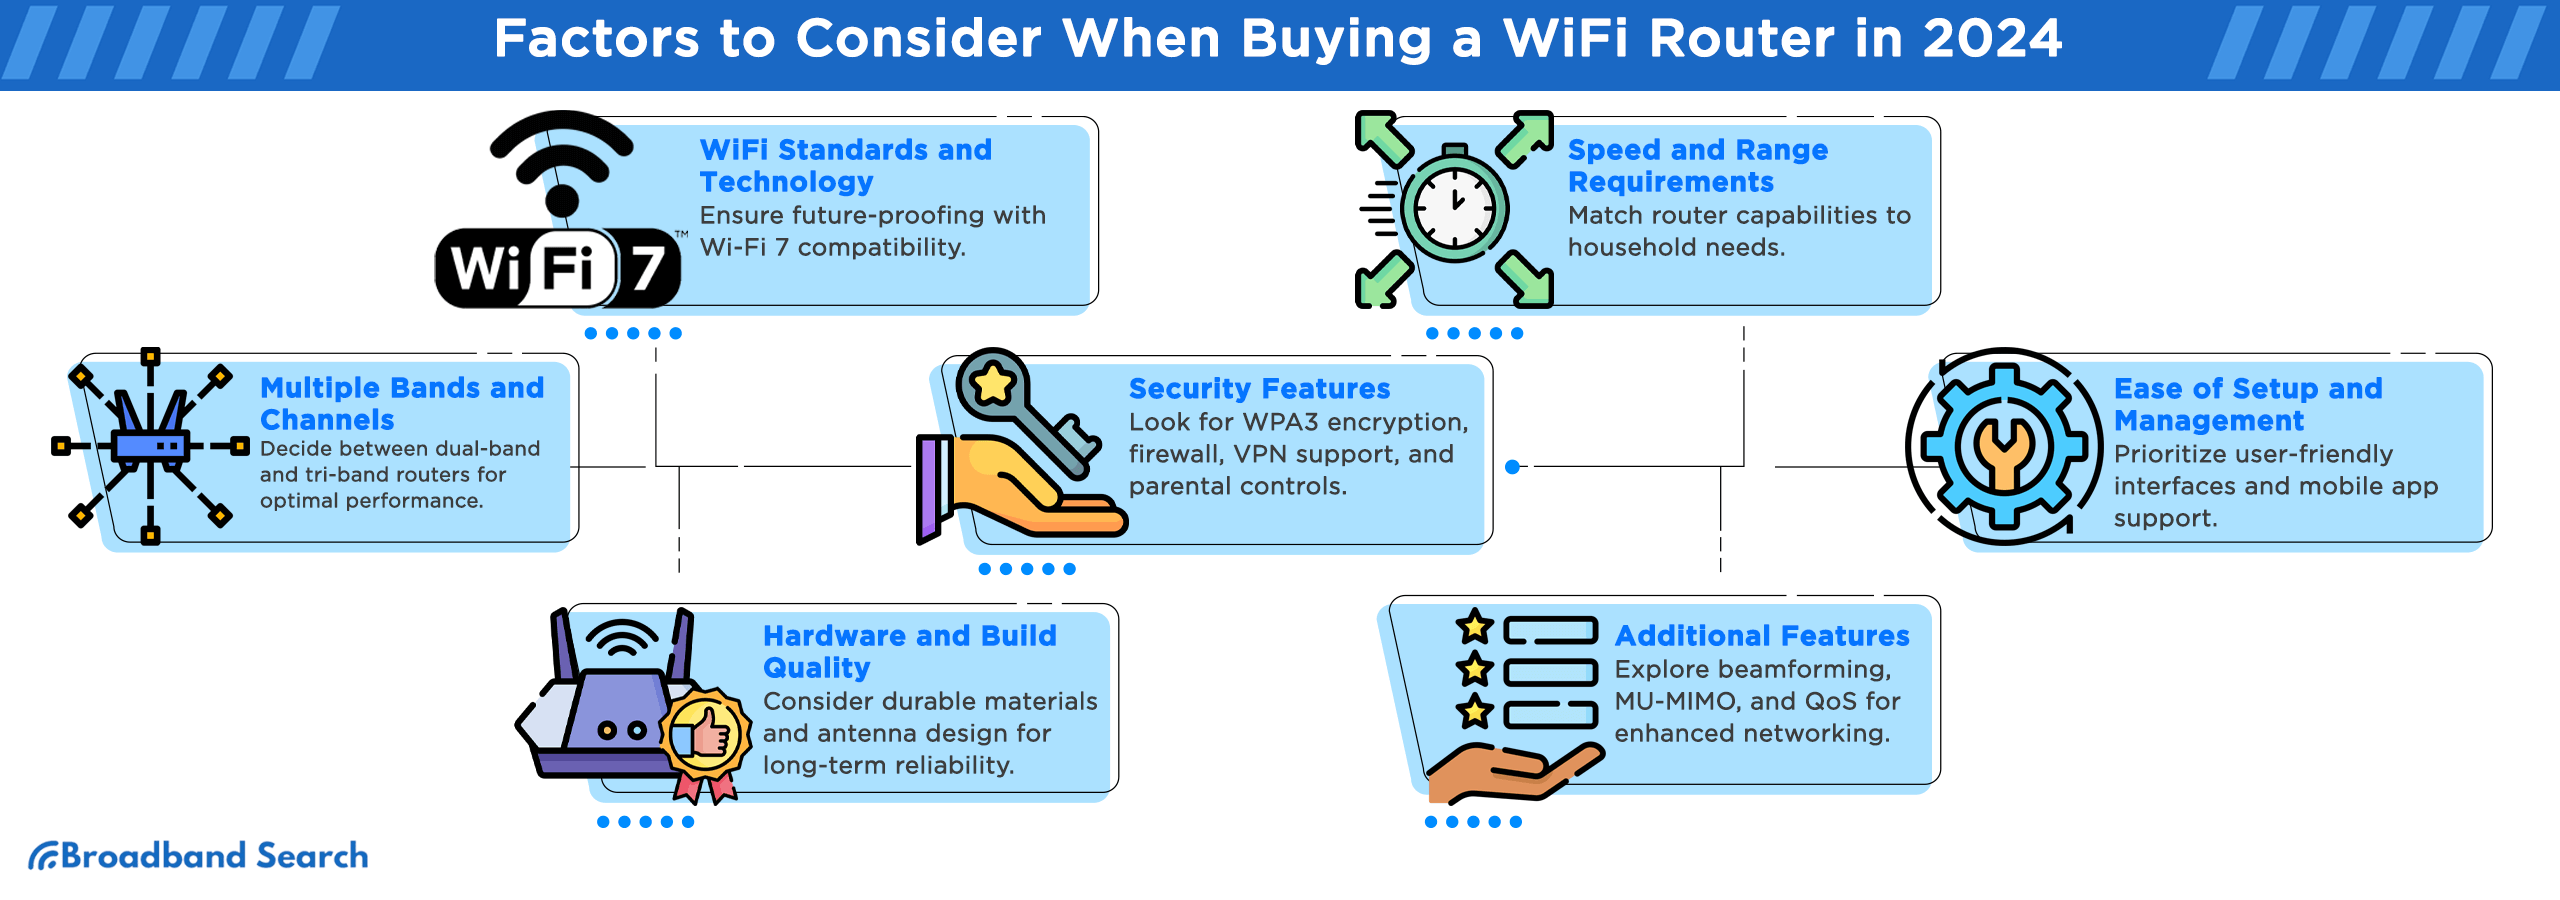 Factors to consider when buying a wifi router in 2024